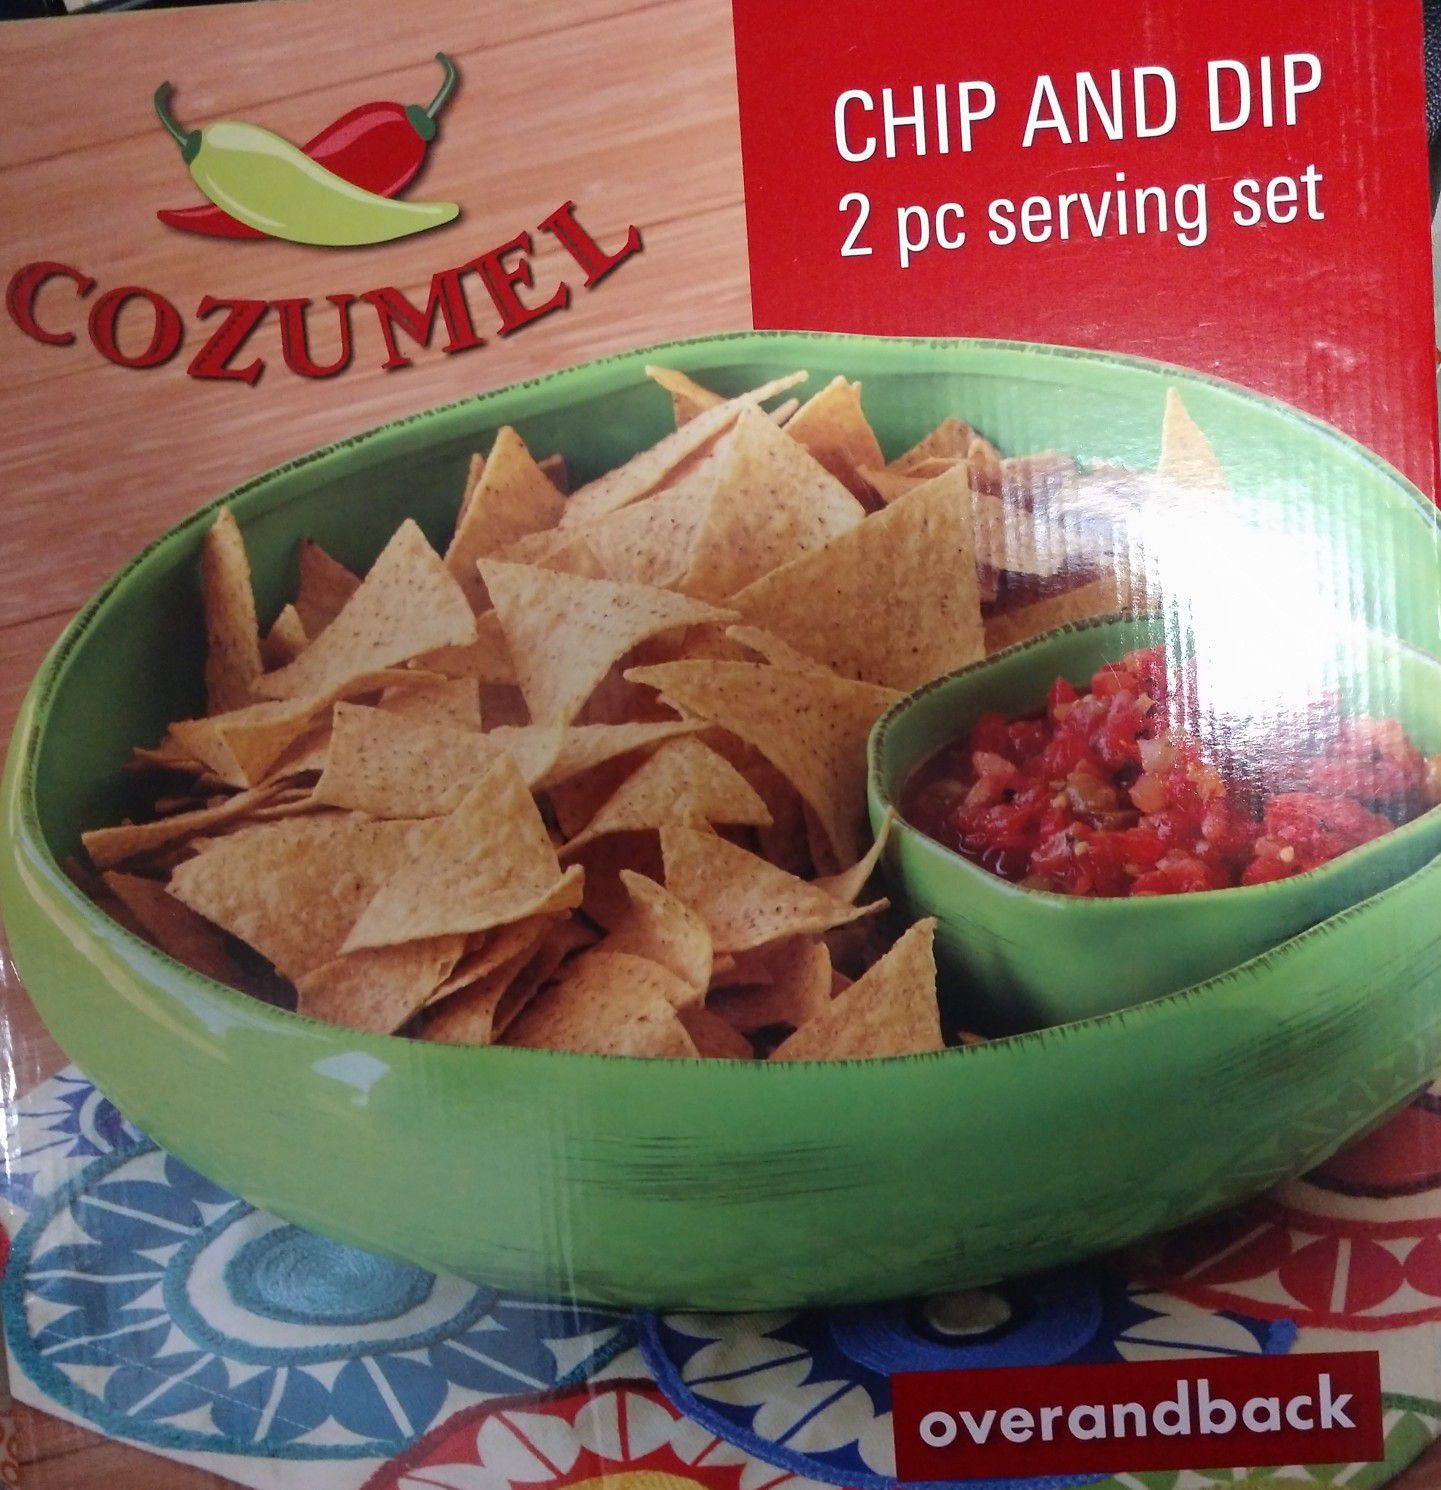 Chip and dip 2 pc serving set